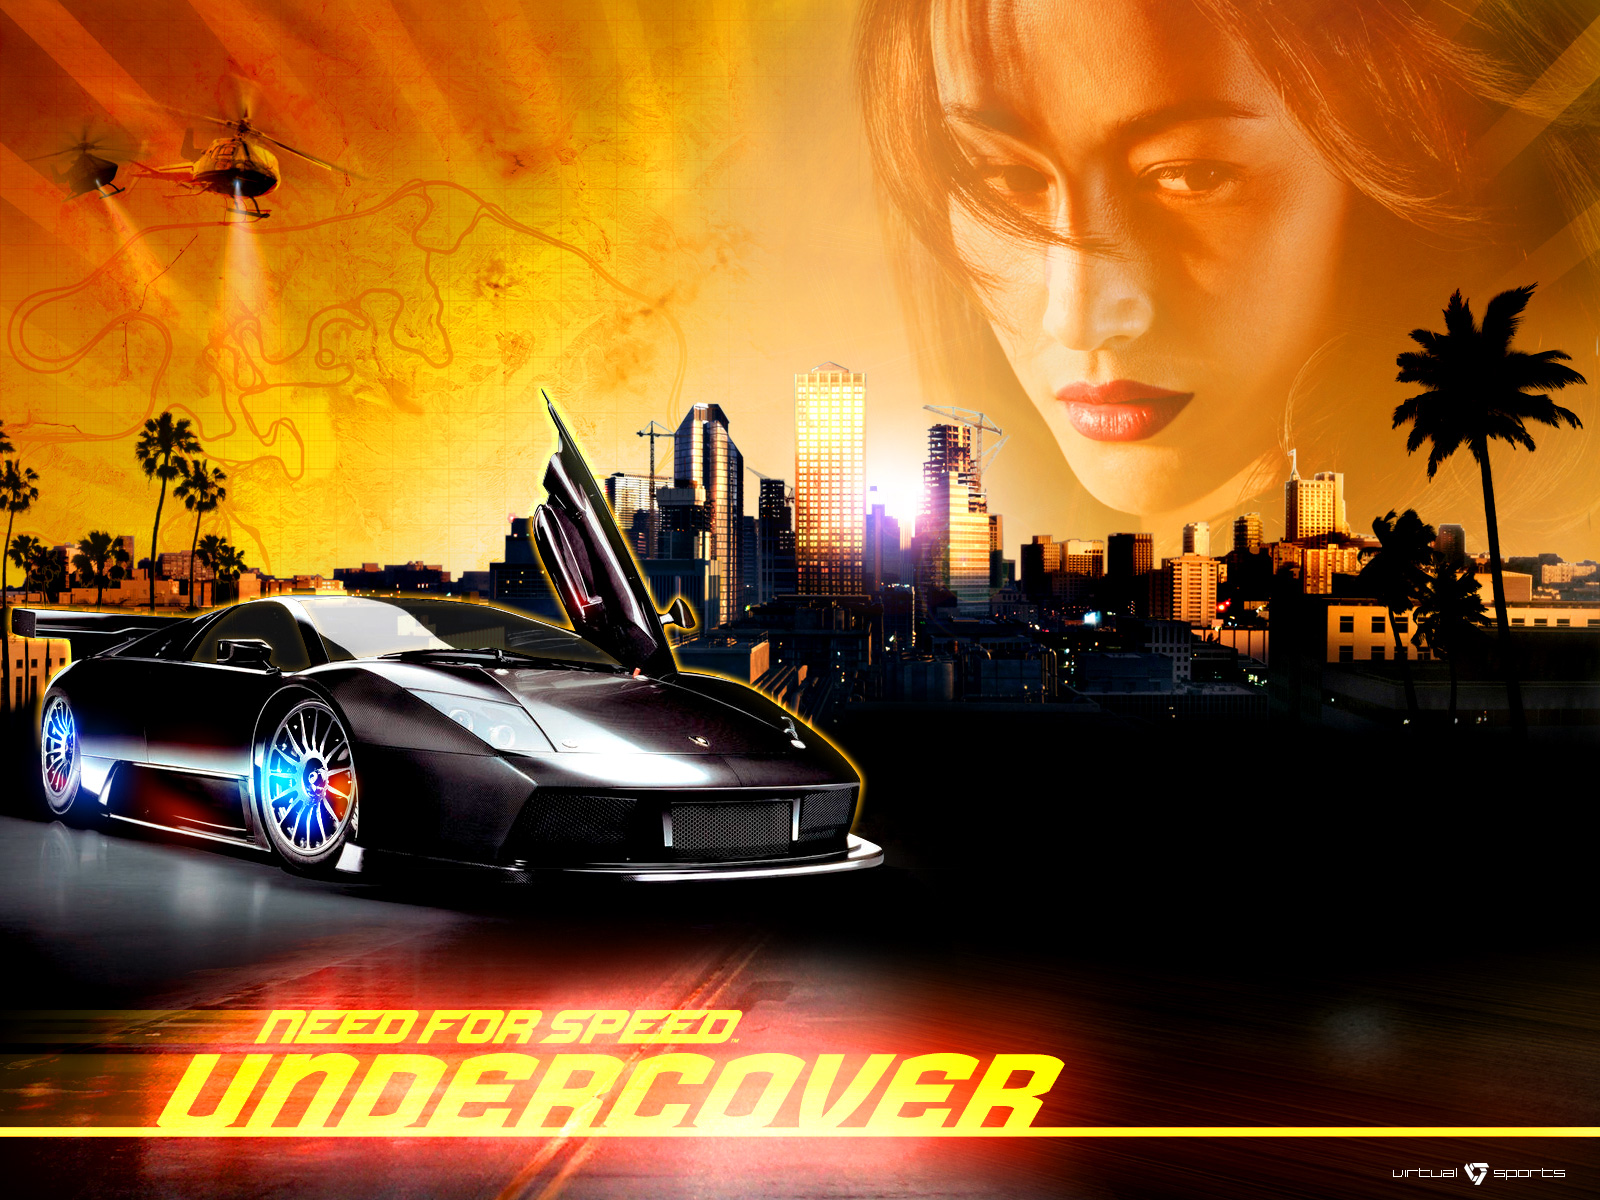 Need For Speed Undercover free Download PC Game (Full Version)